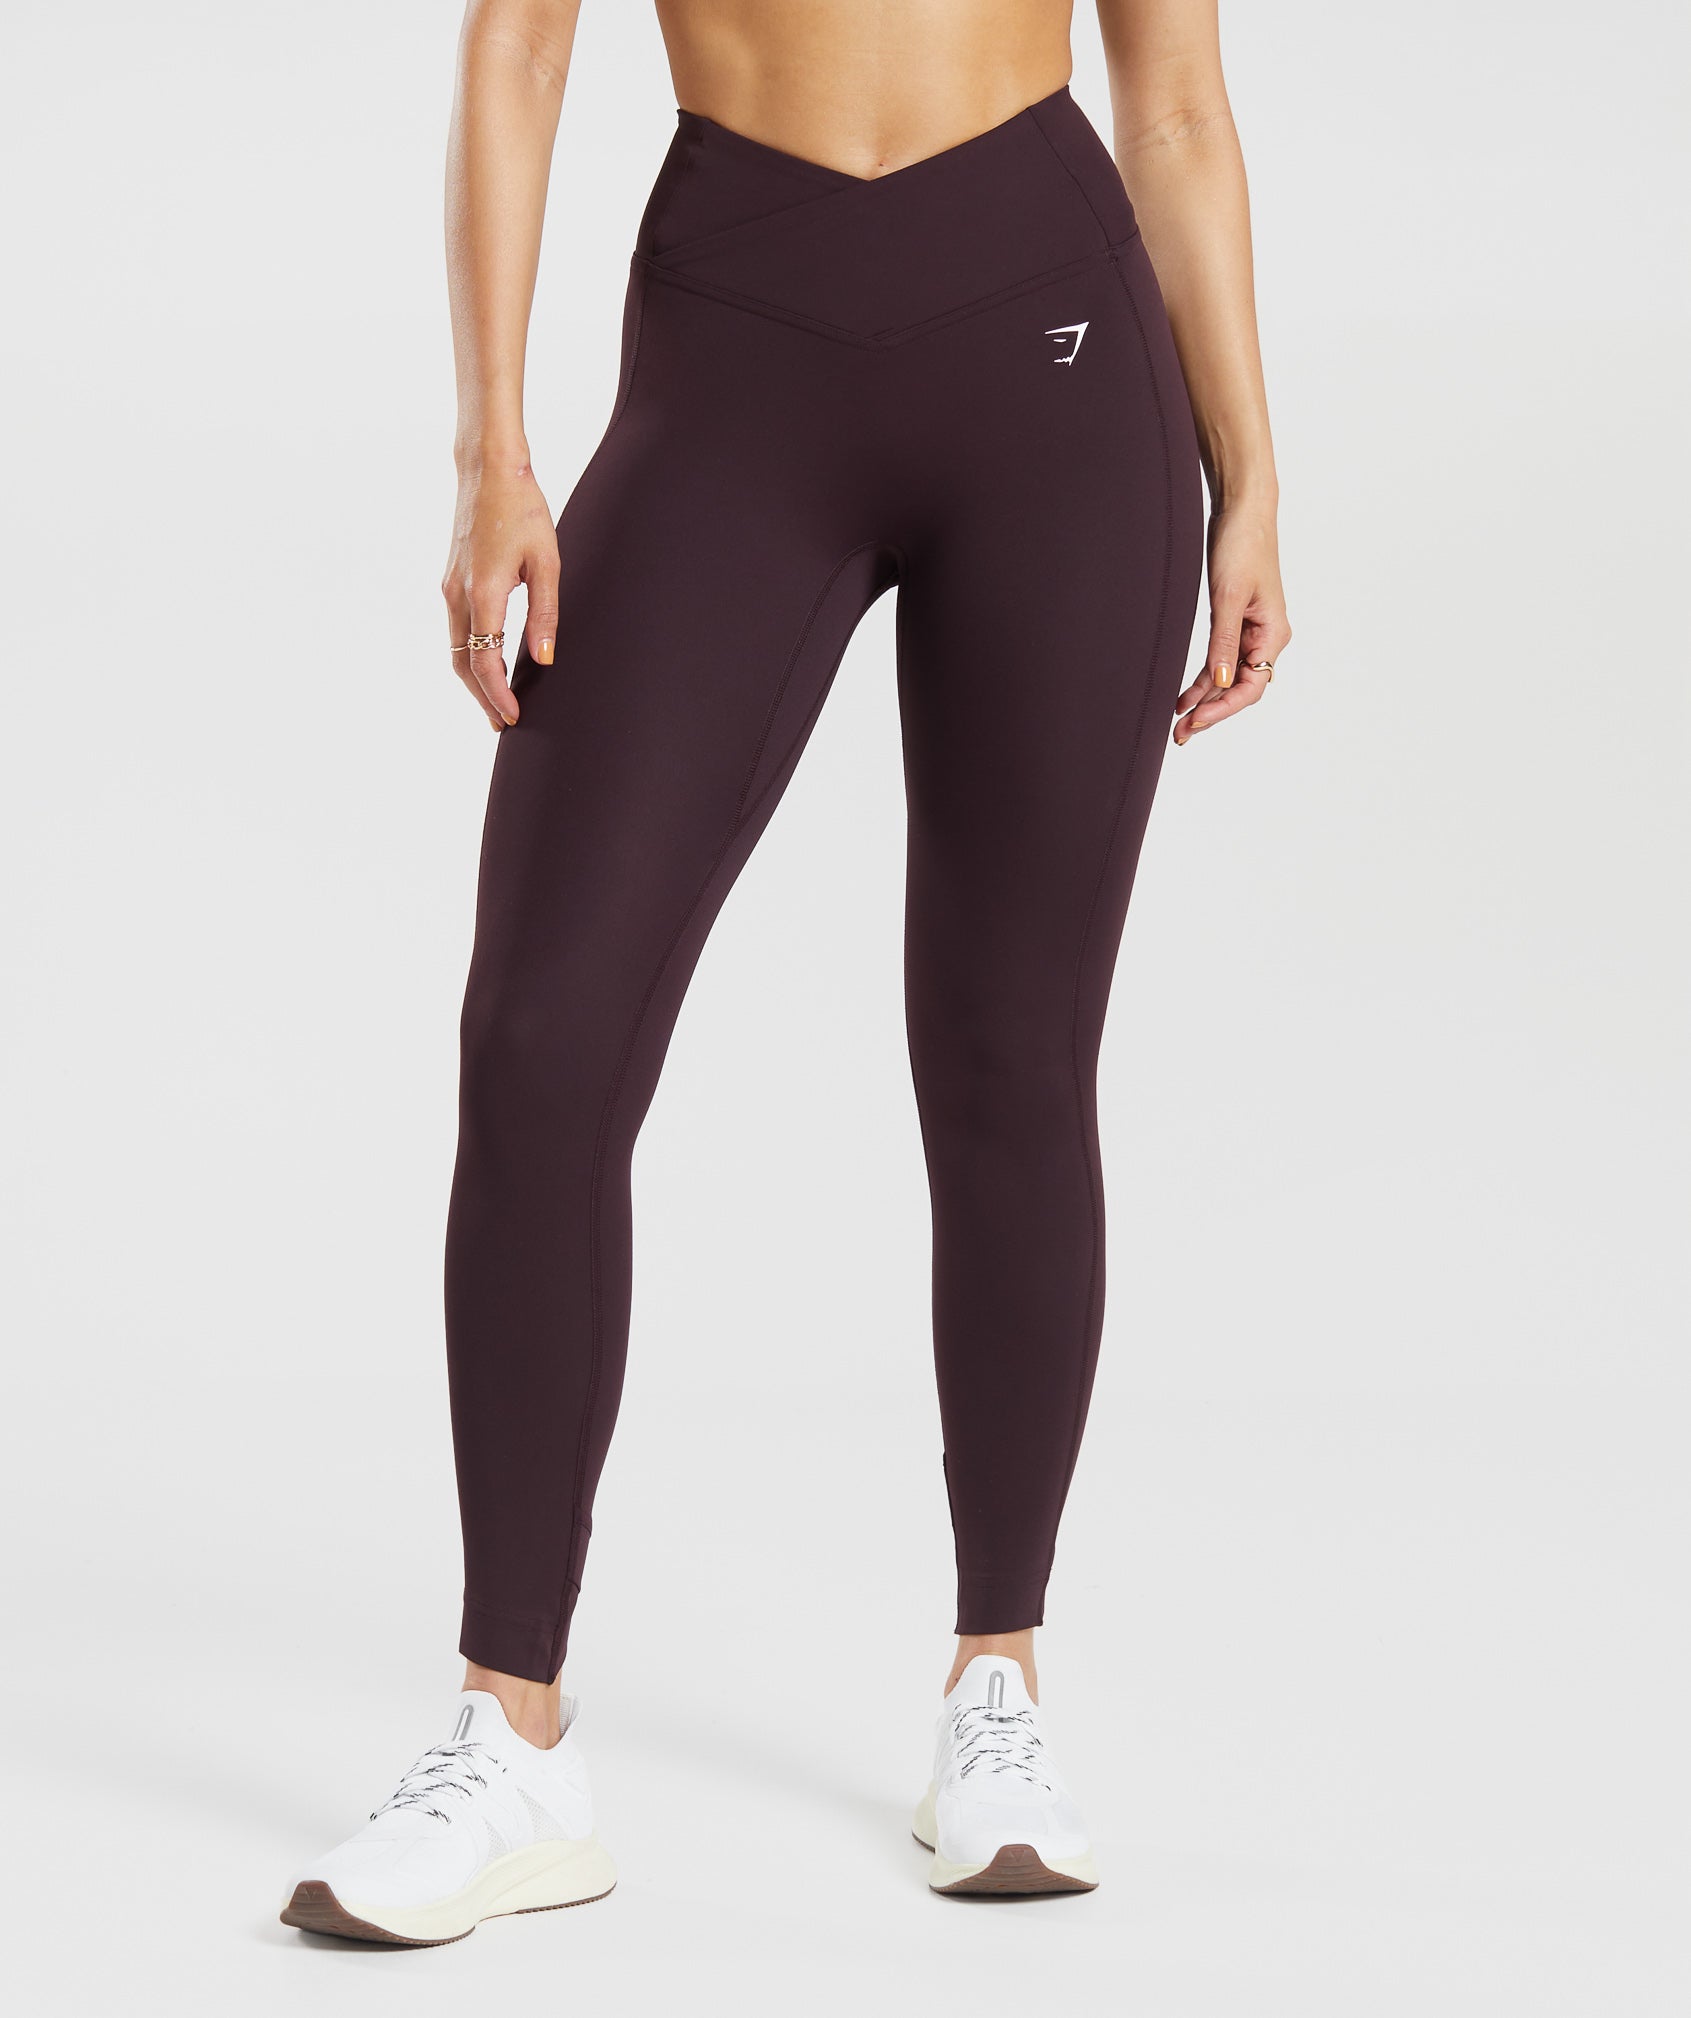 Crossover Athletic Legging, Olive - MECO7